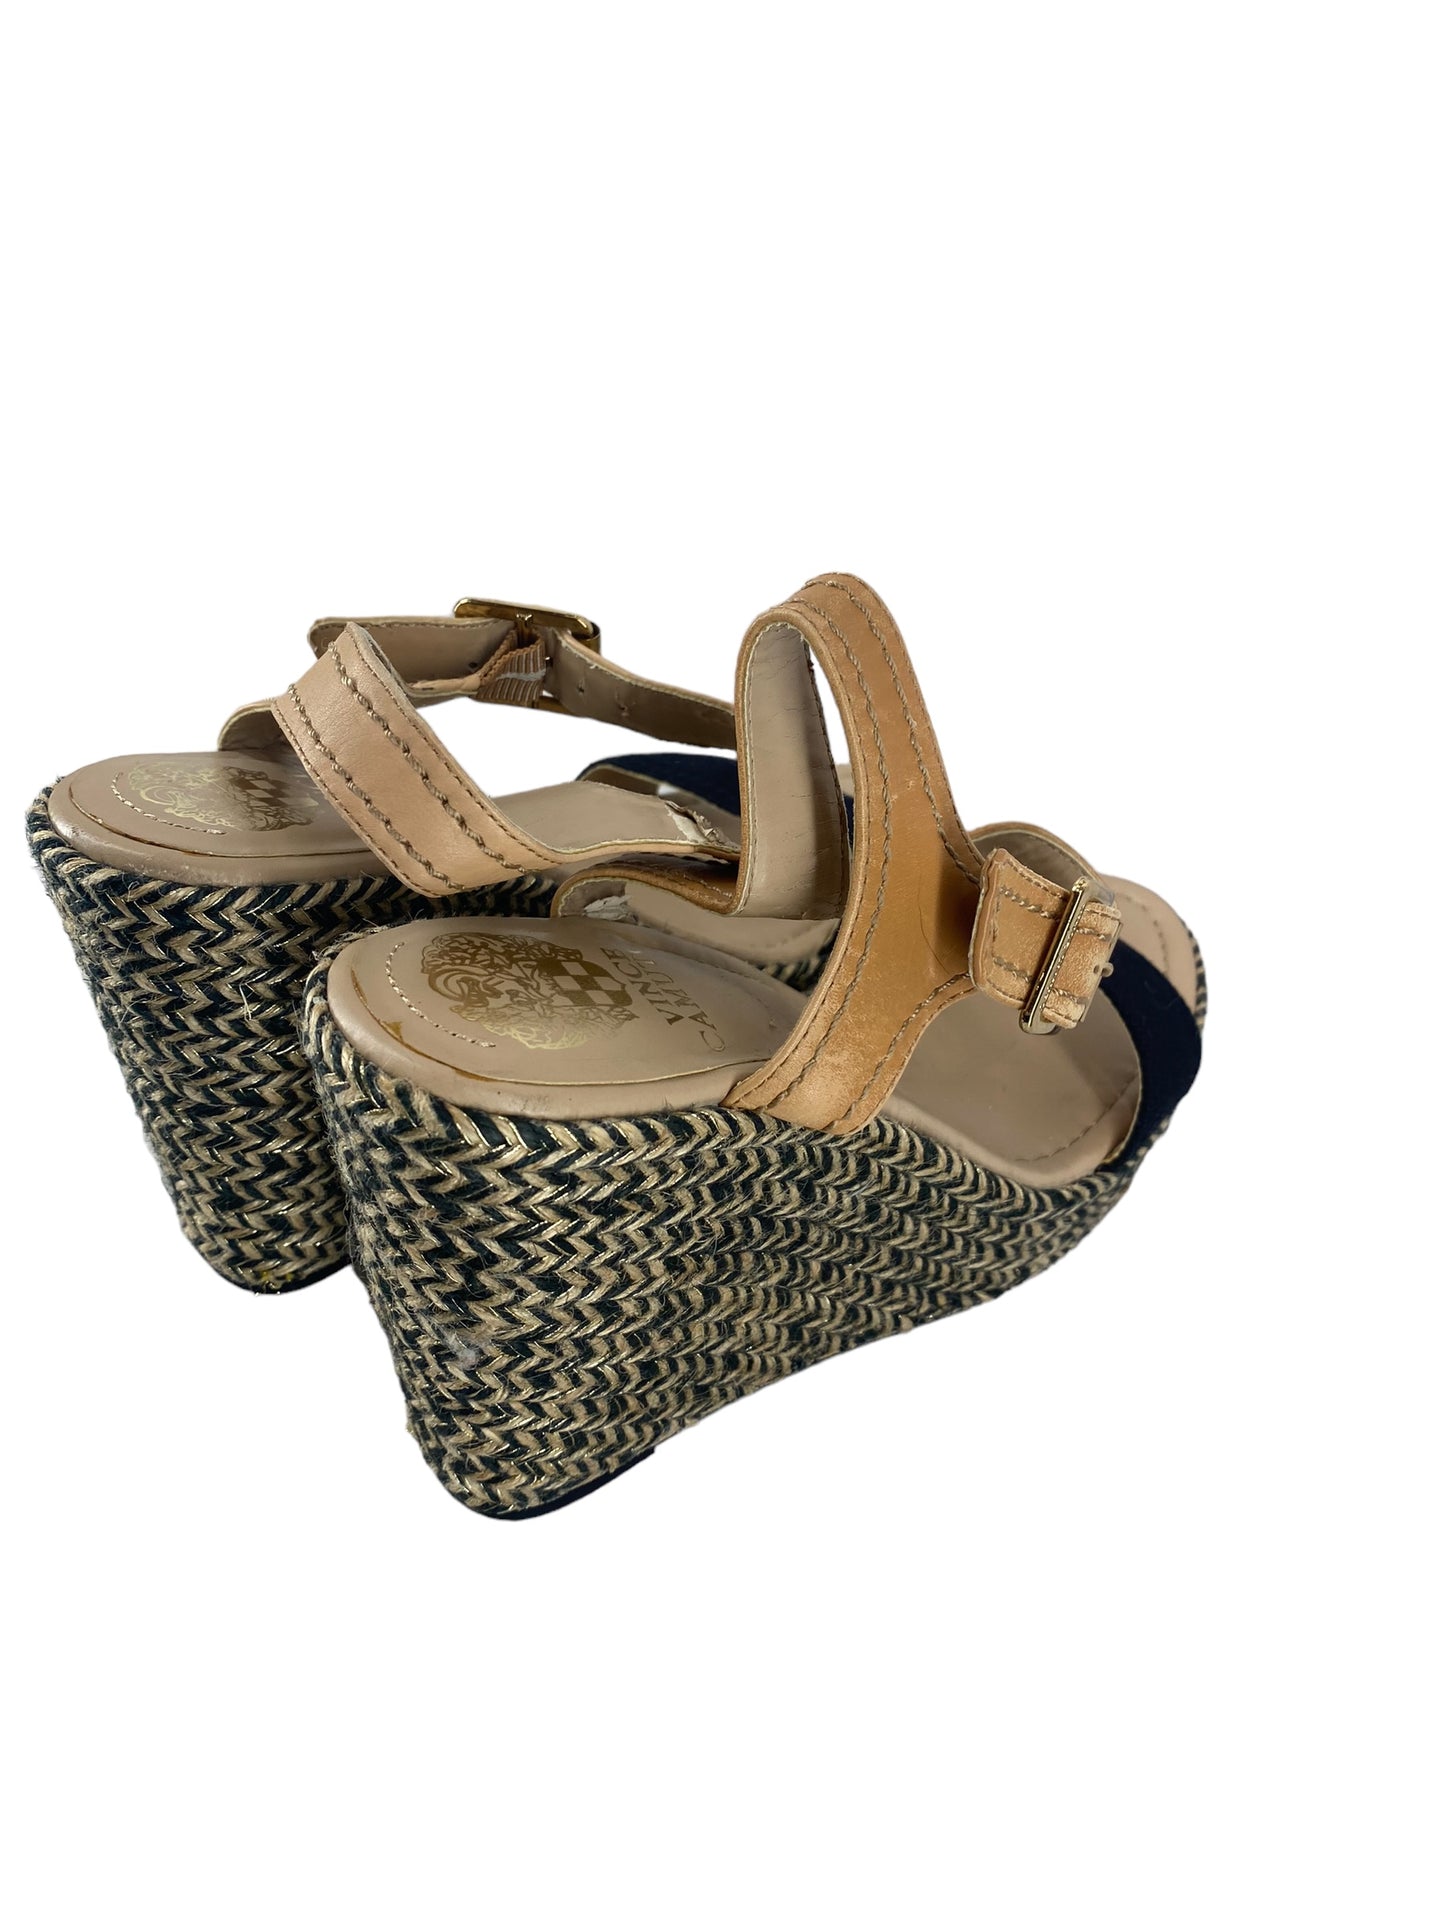 Sandals Heels Wedge By Vince Camuto  Size: 8.5